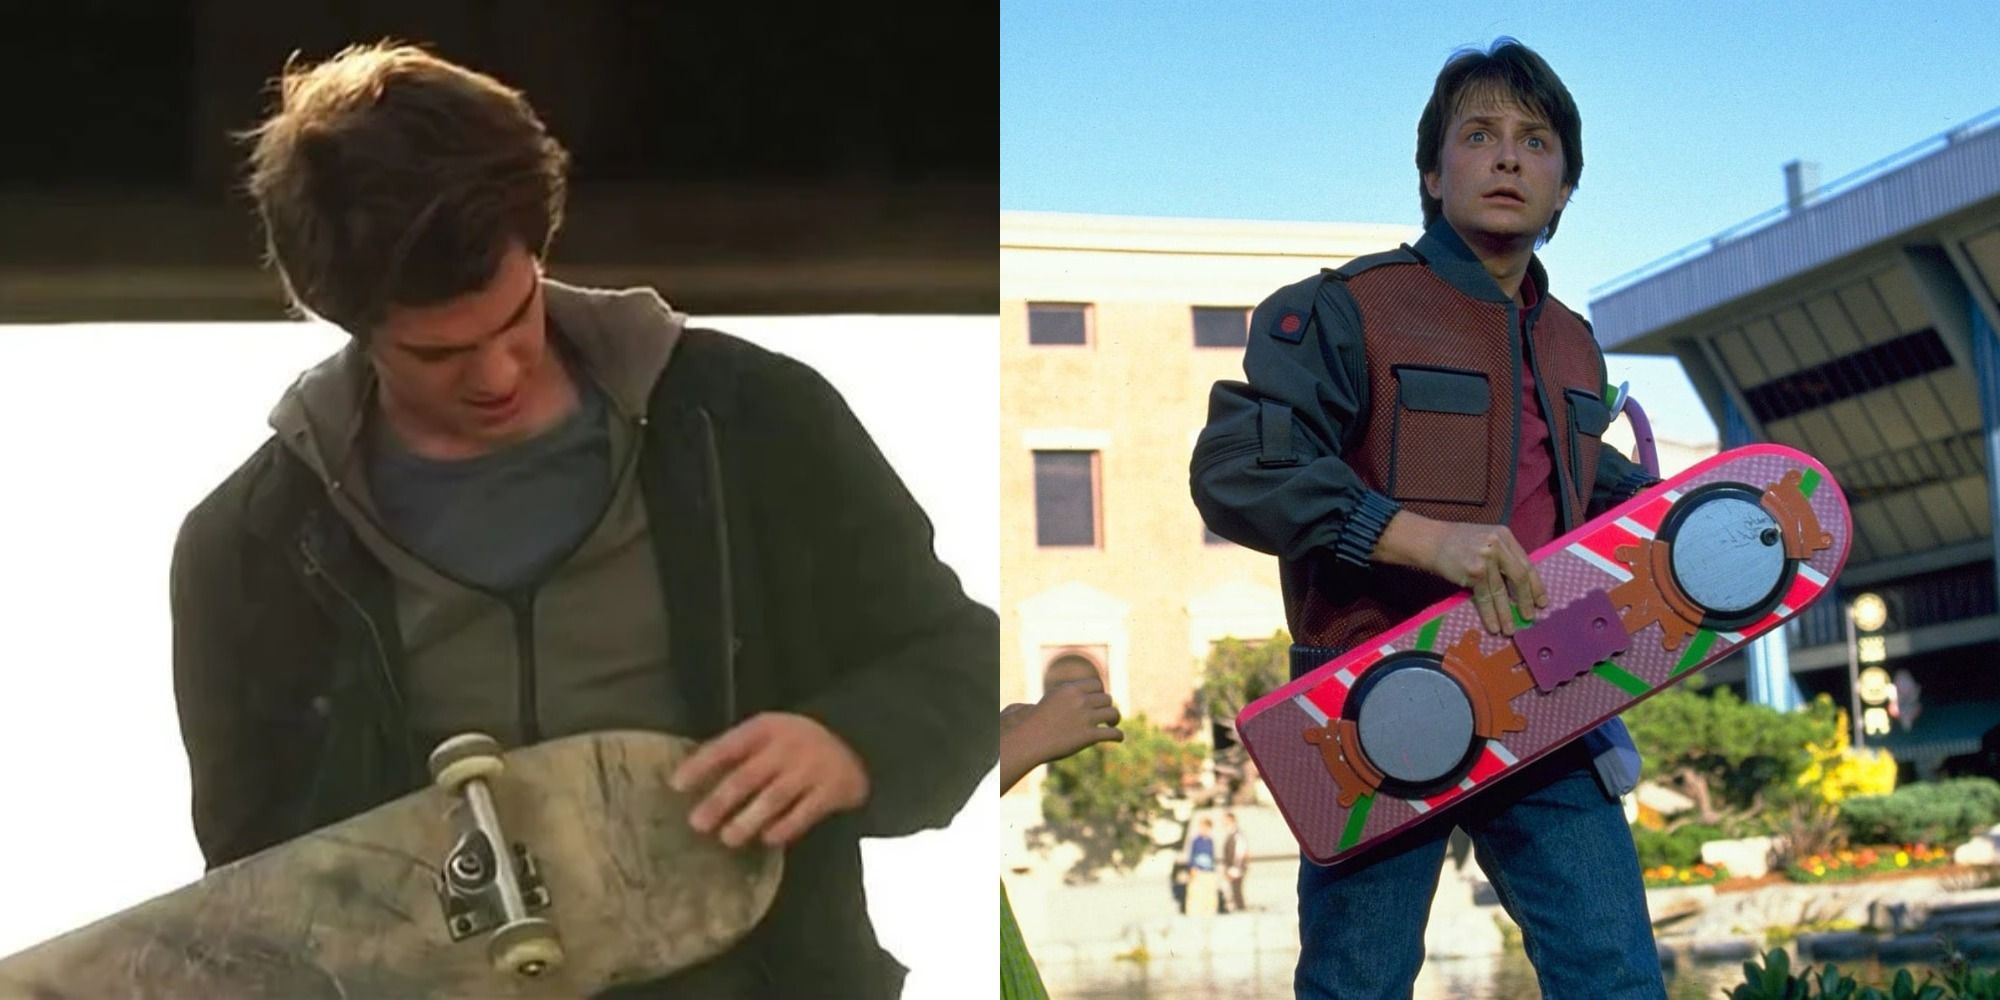 Split image showing Peter with a baord in TASM and Marty with a board in Back to the Future II